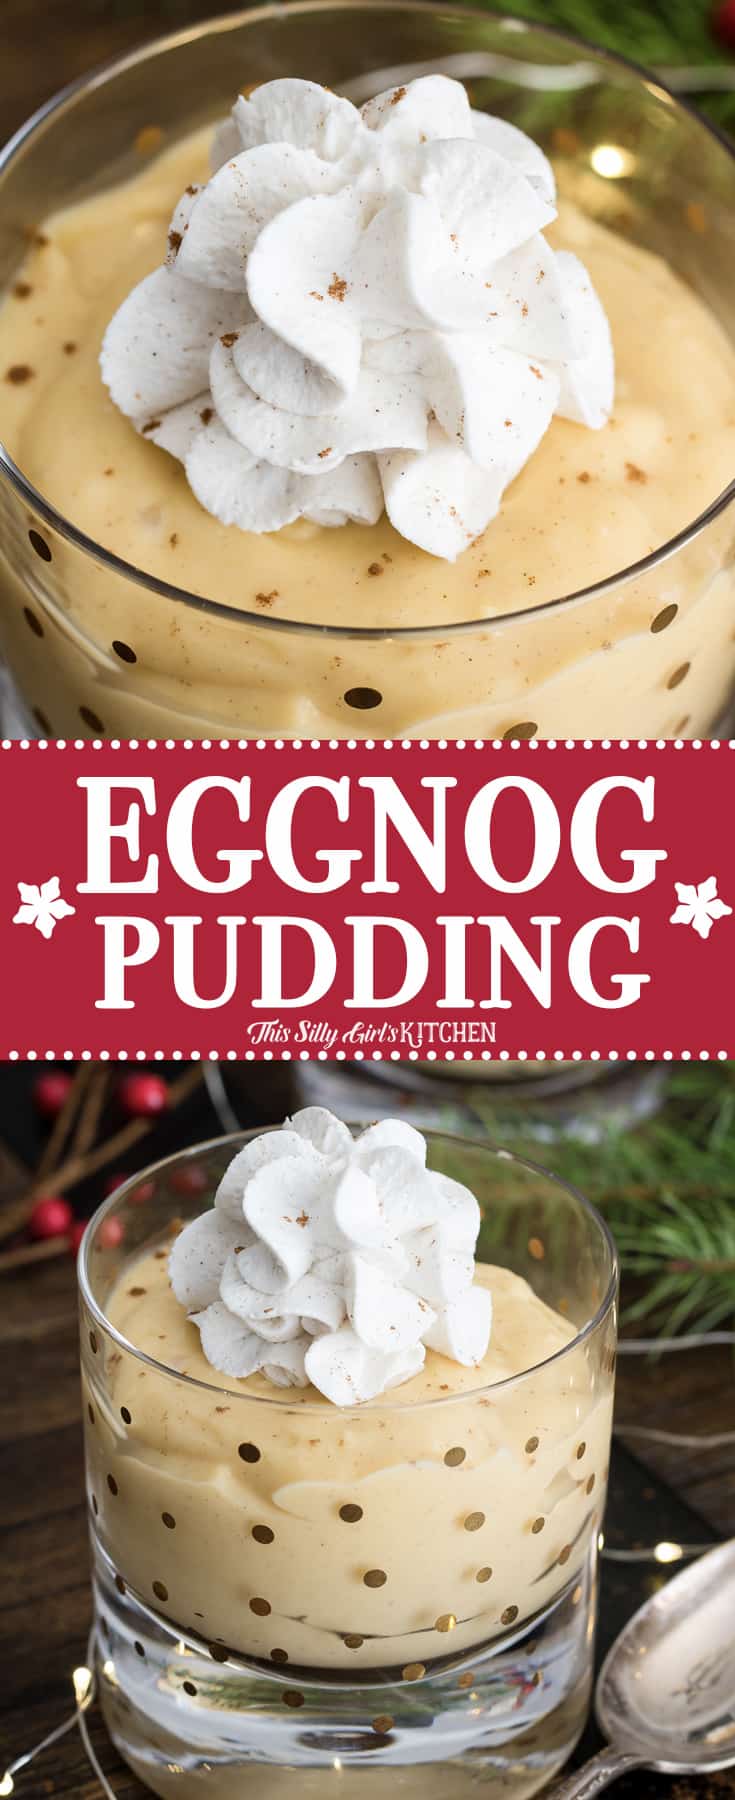 Collage image of Eggnog Pudding with words in middle